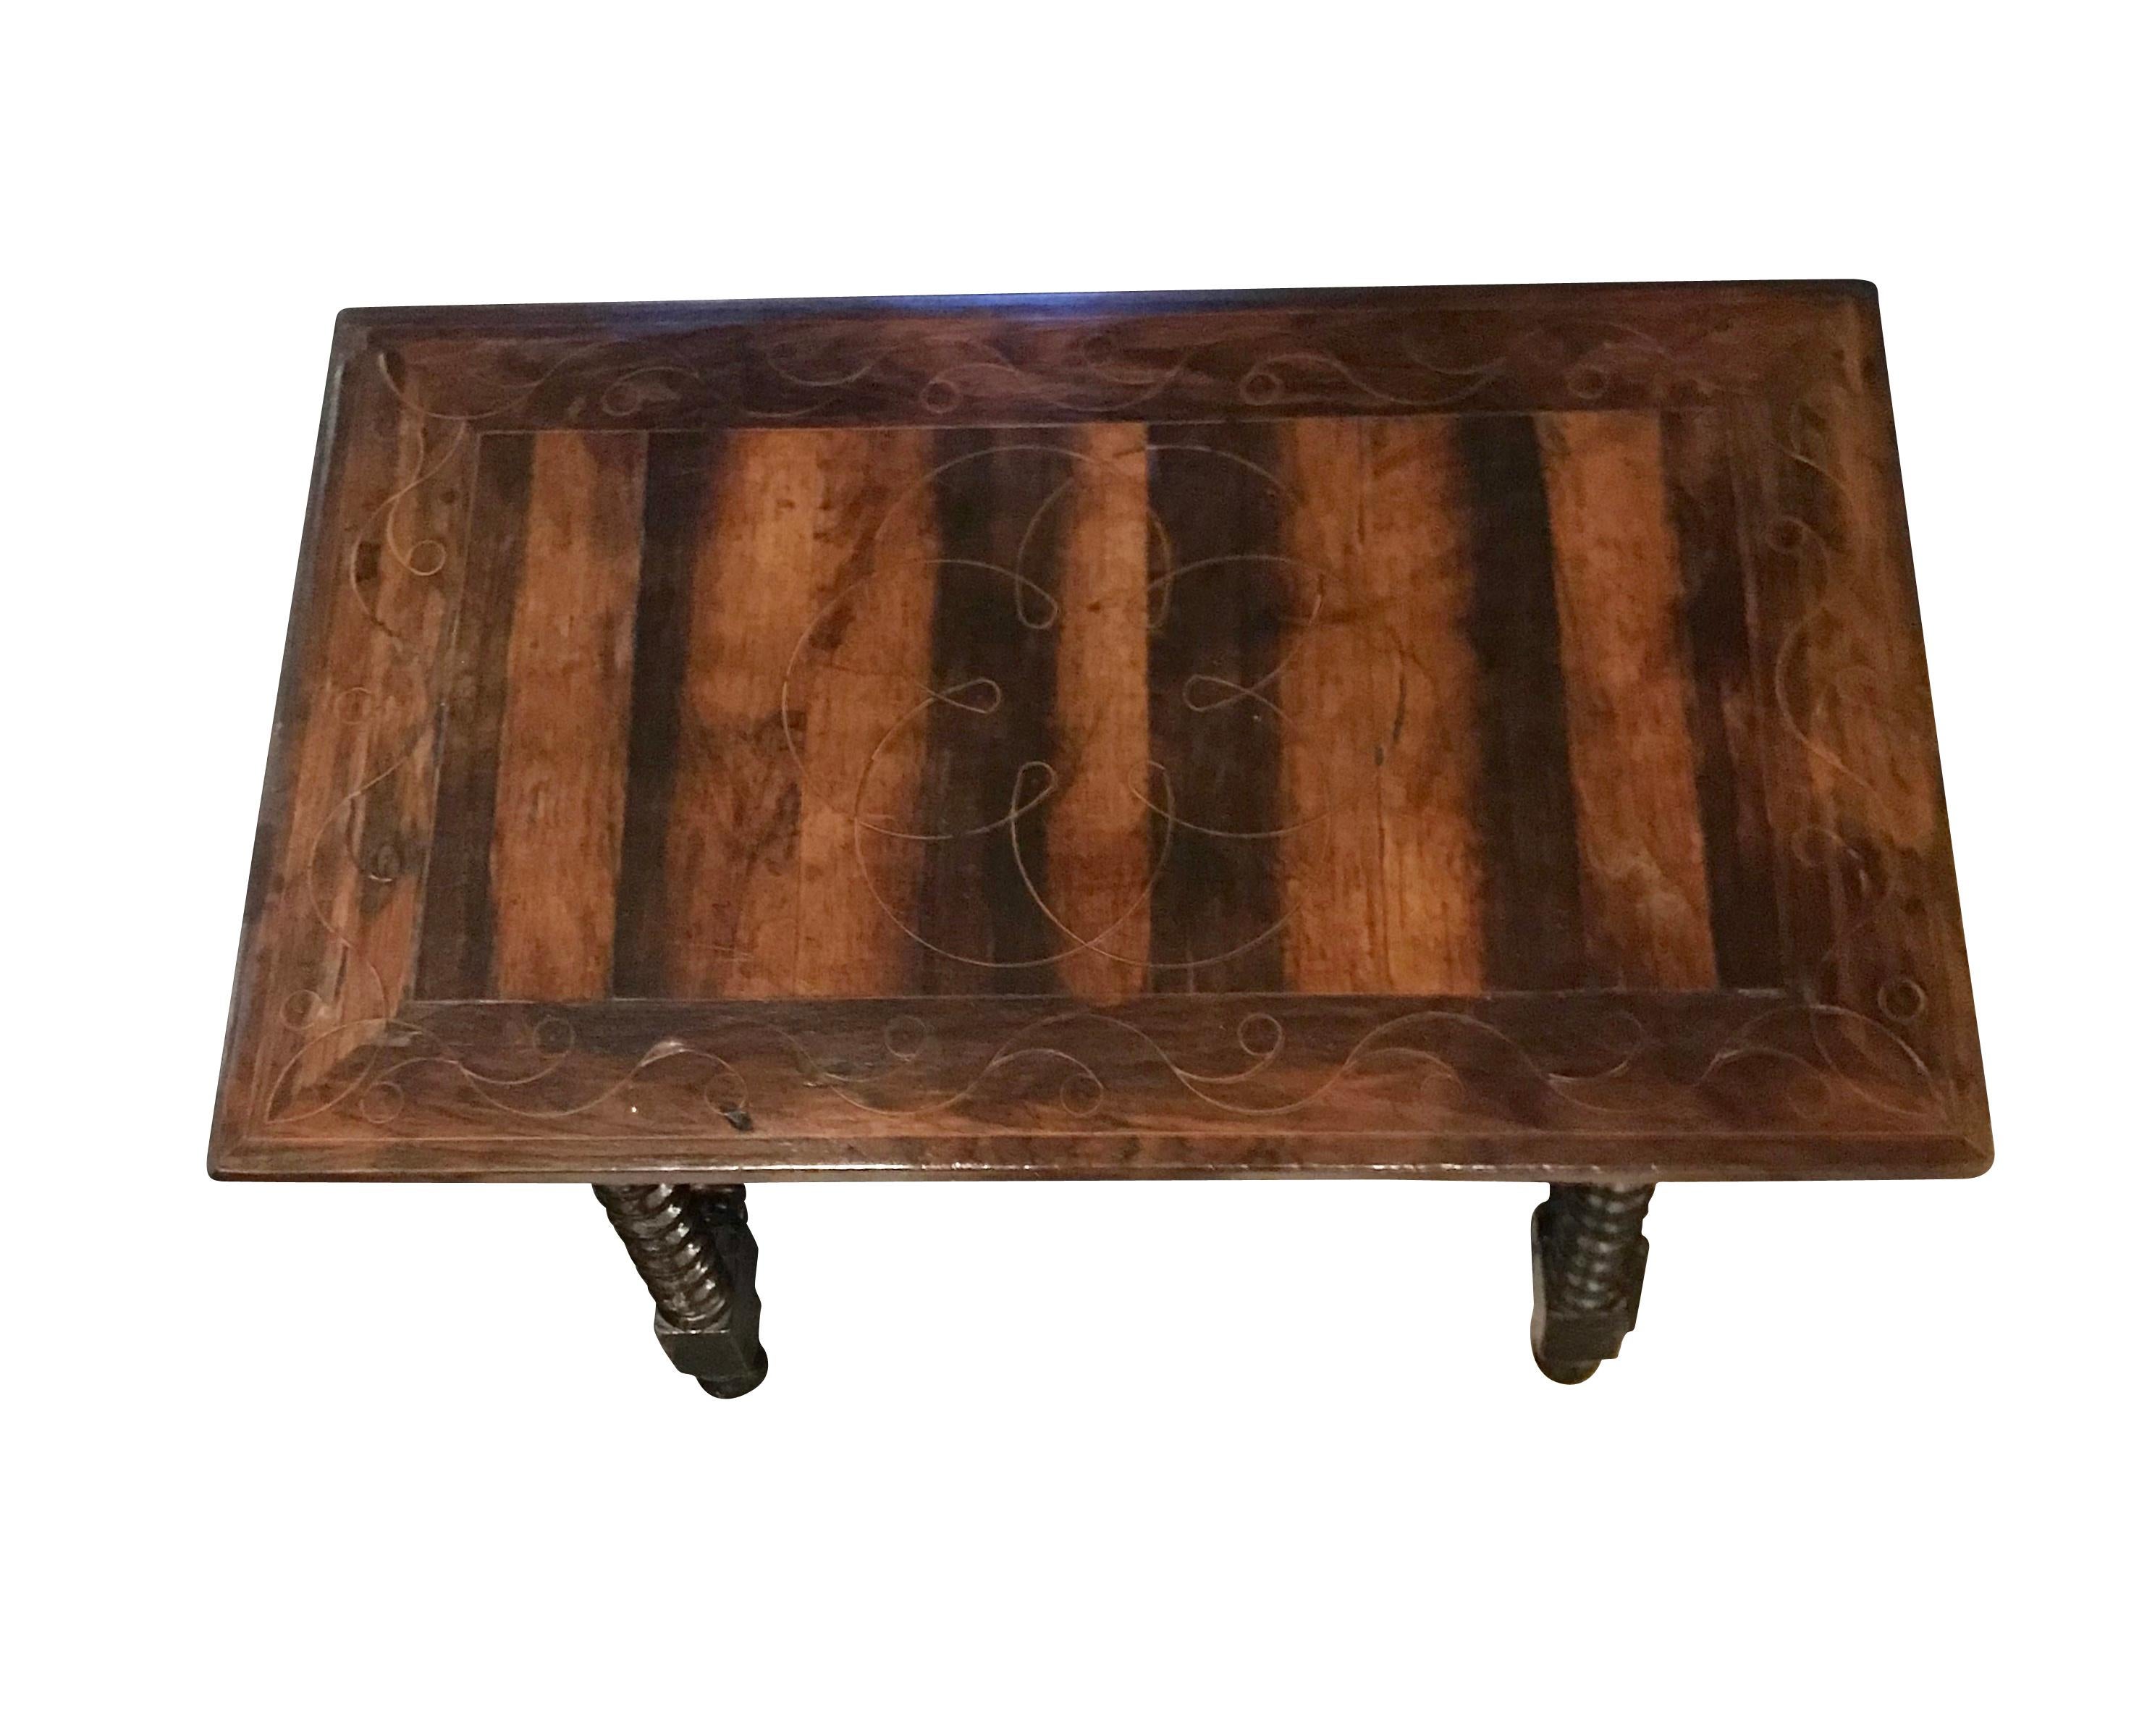 19th century traditional Spanish iron cross bar base rectangular wooden side table.
Decorative striped effect wood top.
Newly refinished.
 